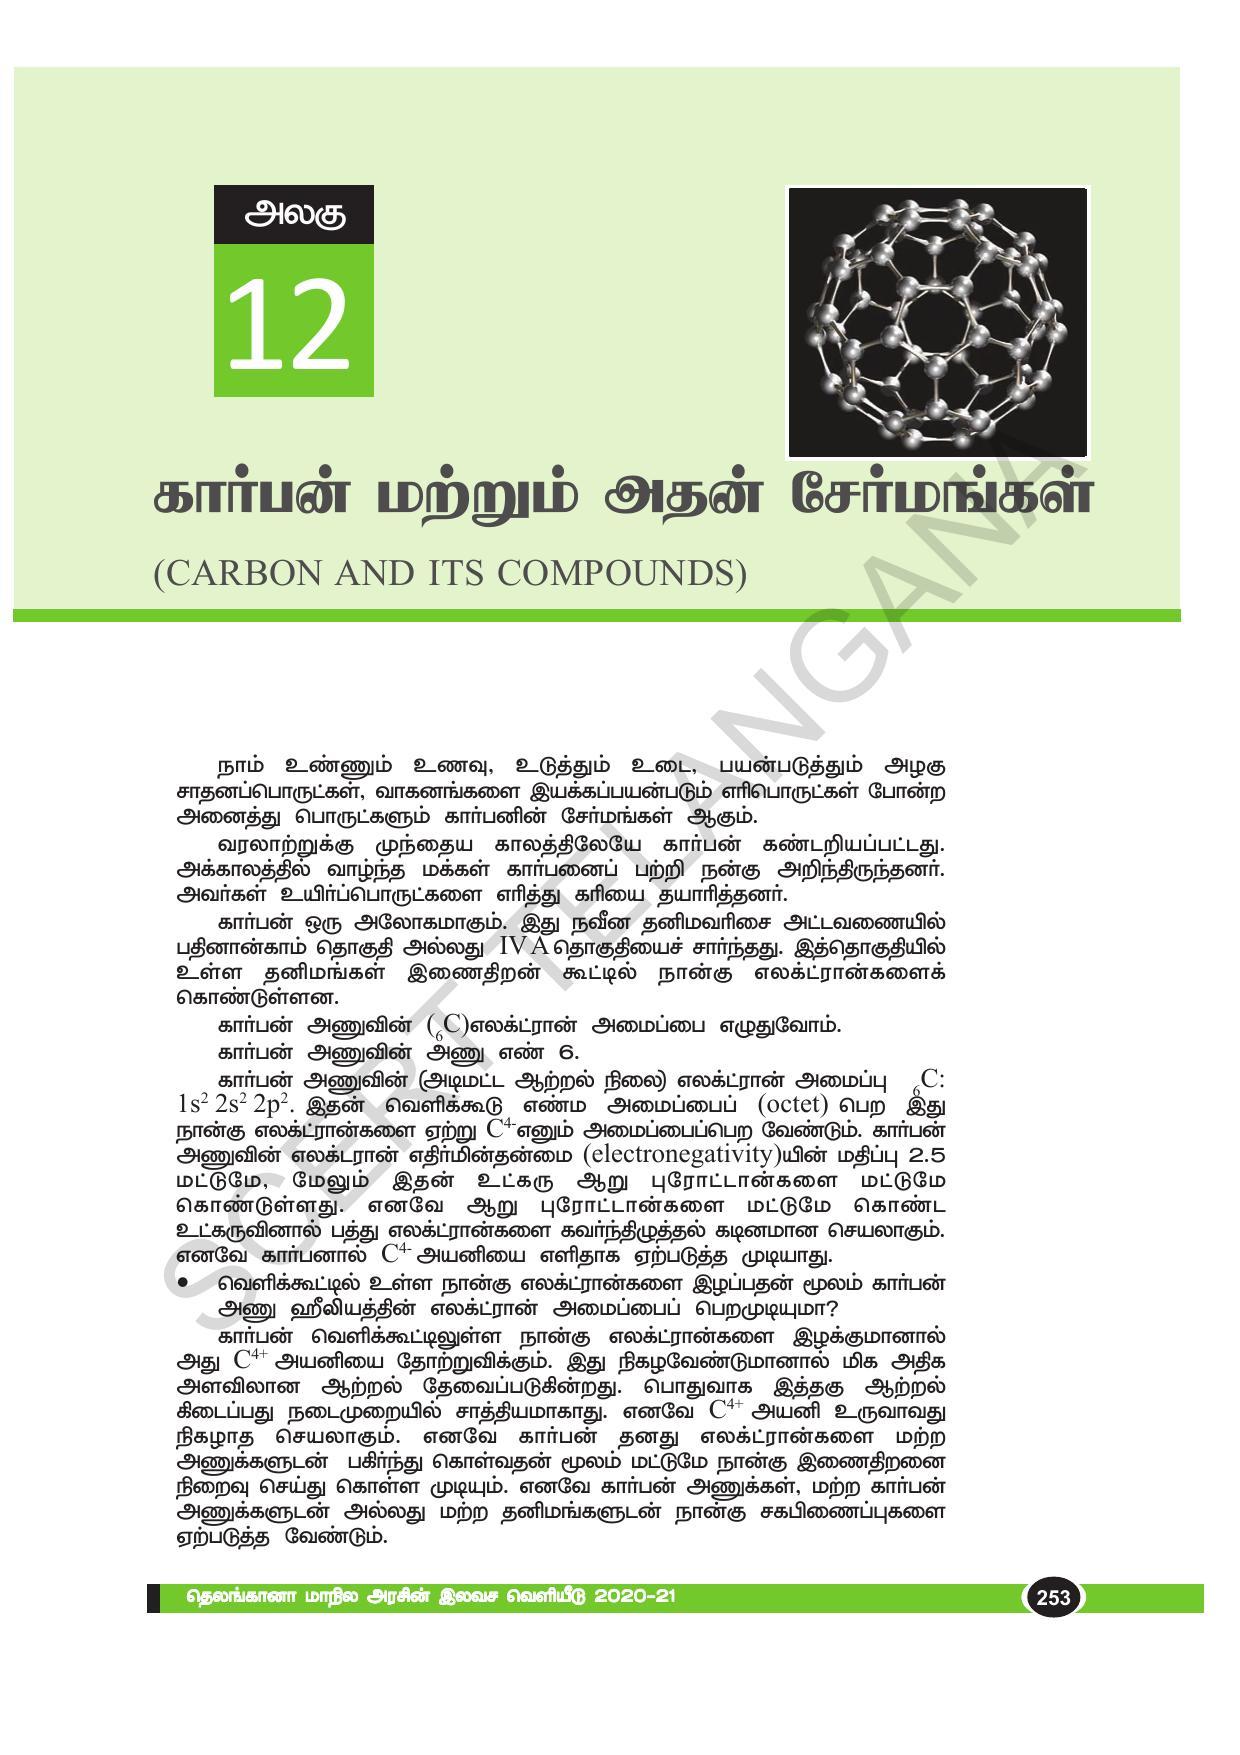 TS SCERT Class 10 Physical Science(Tamil Medium) Text Book - Page 265